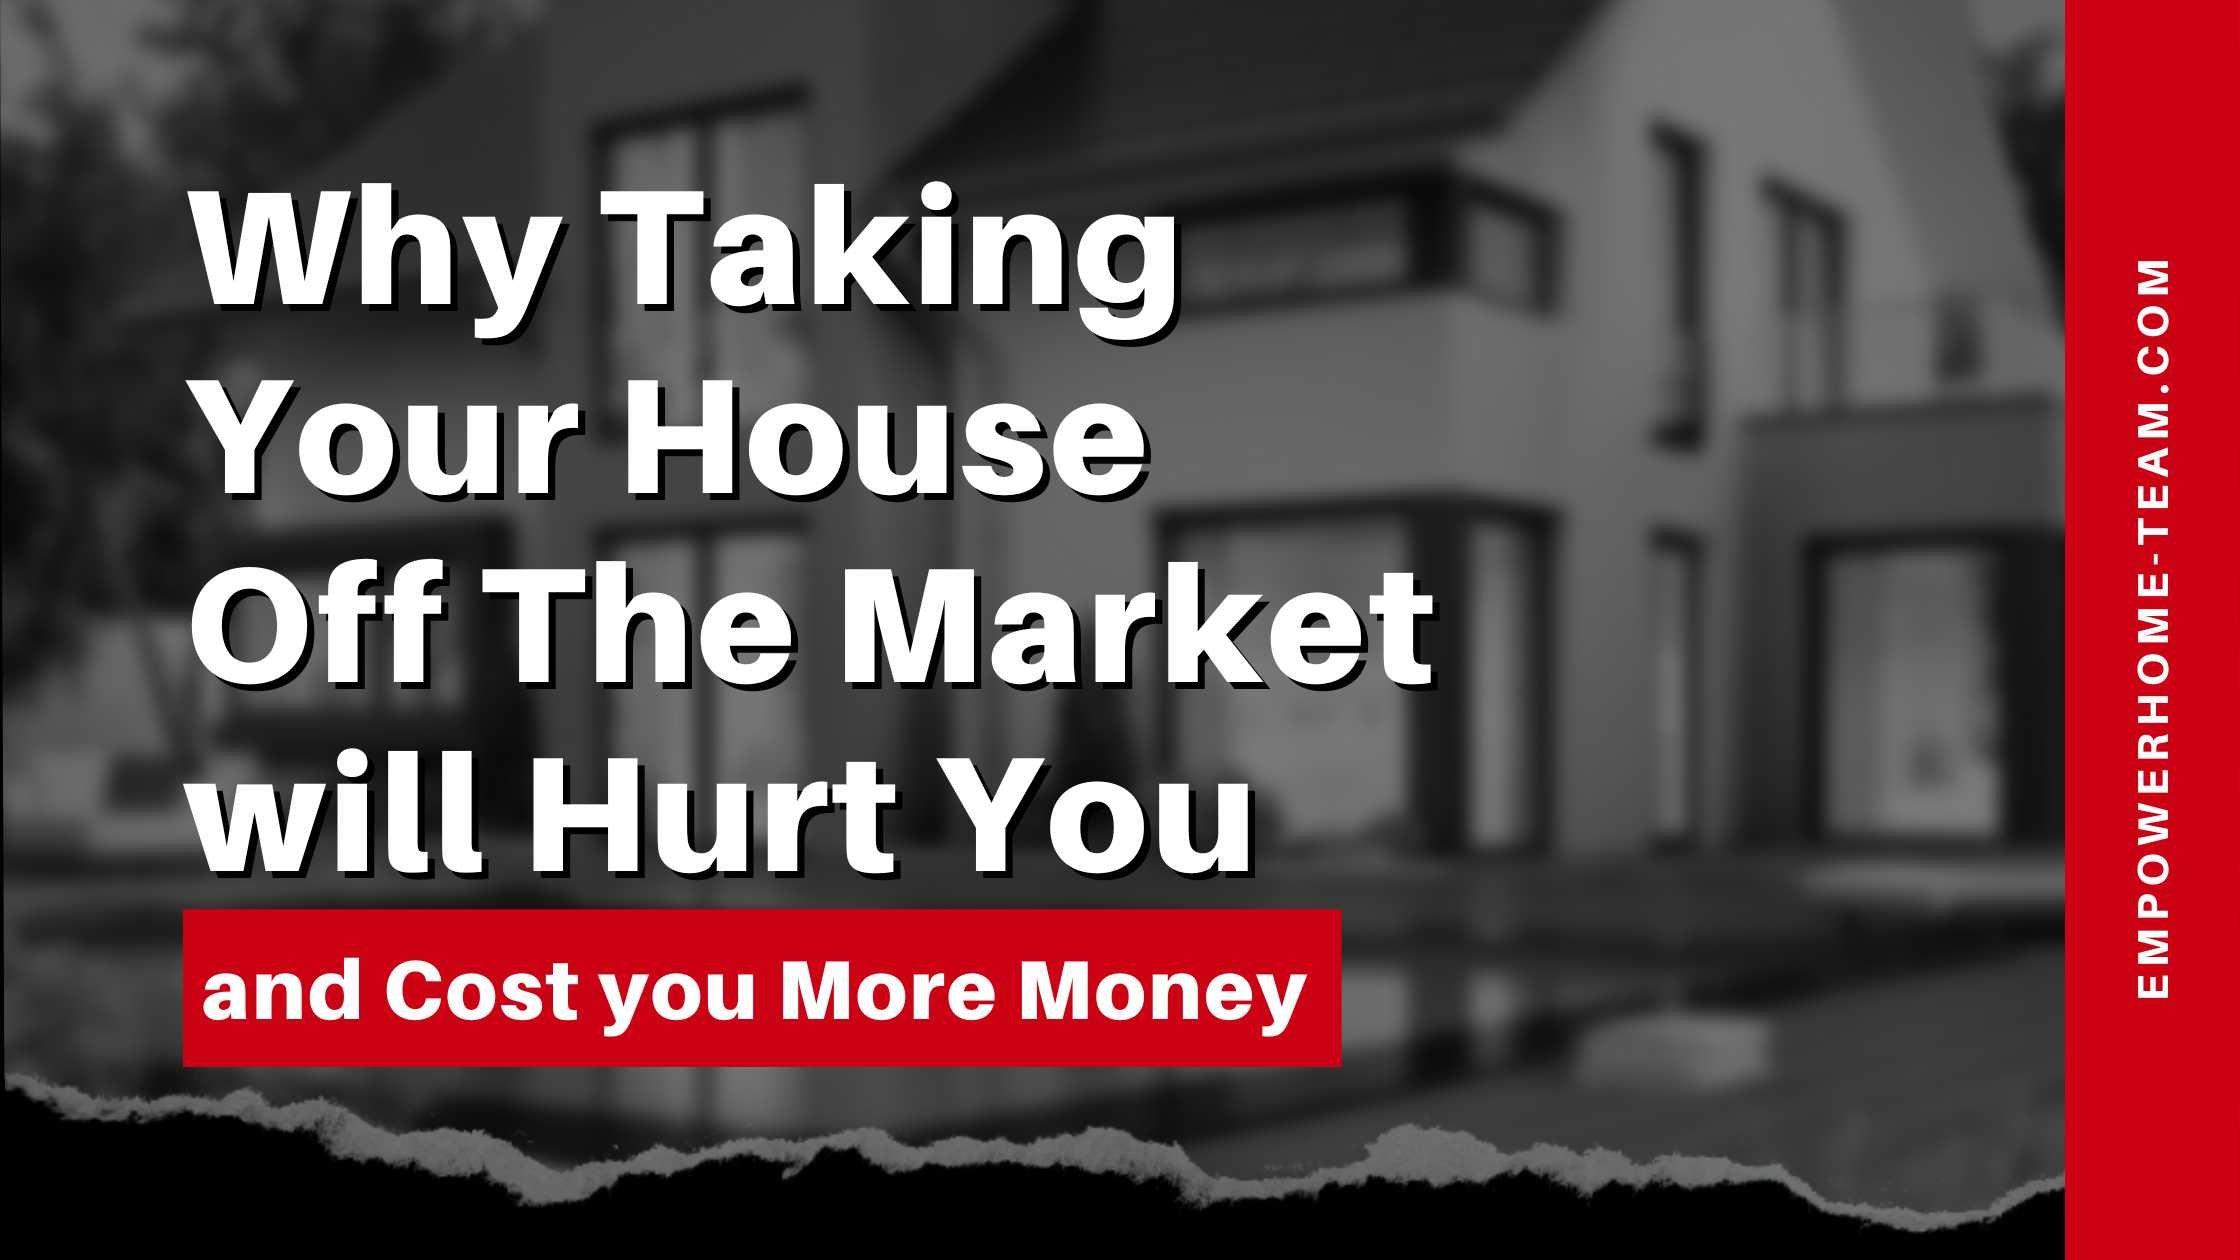 Why Taking Your House Off The Market will Hurt You and Cost you More Money in Raleigh